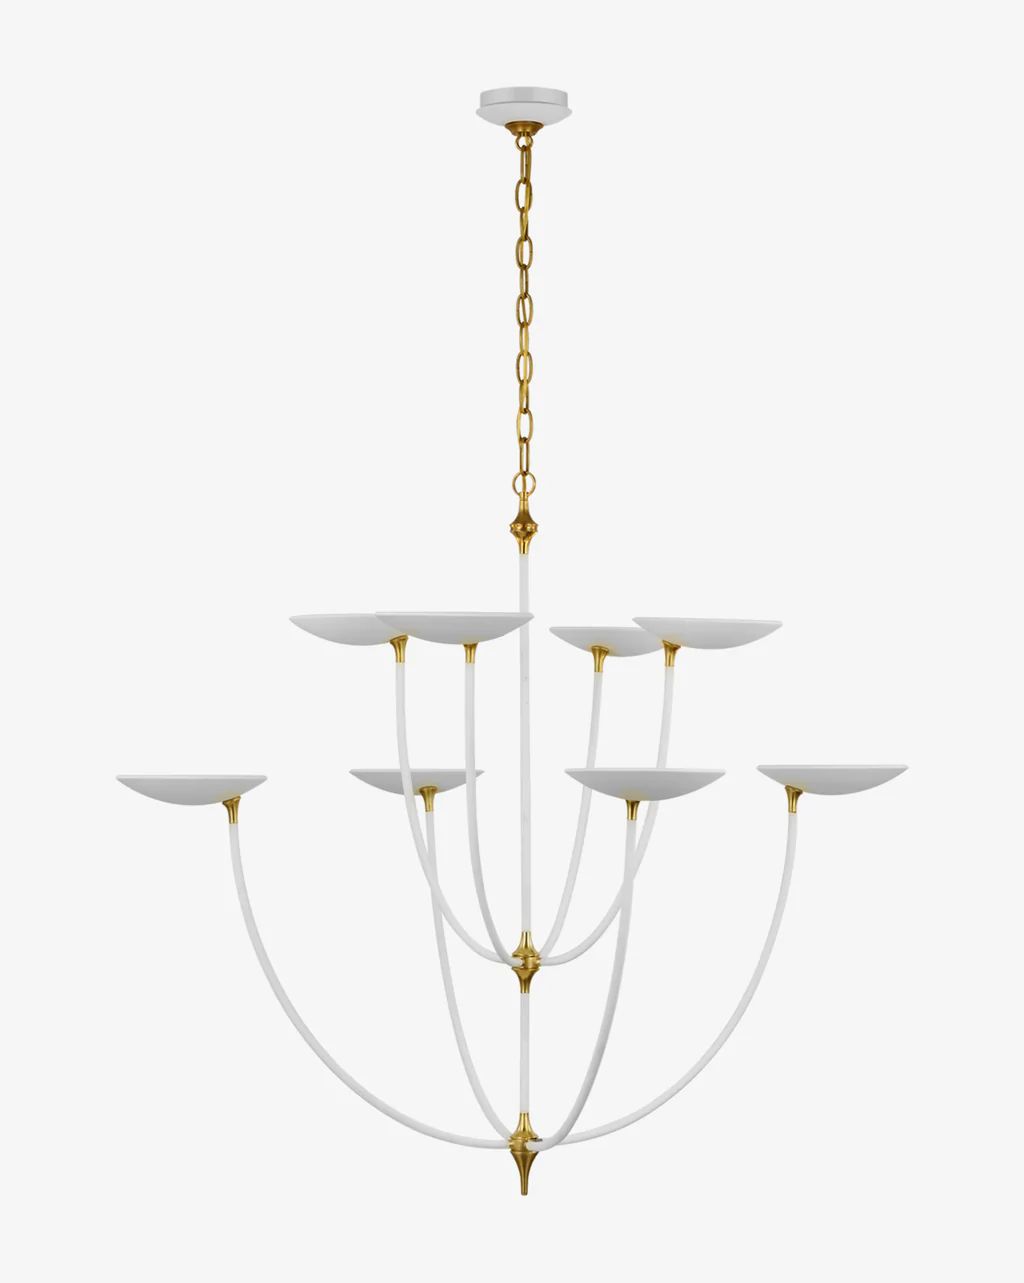 Keira Extra Large Chandelier | McGee & Co.